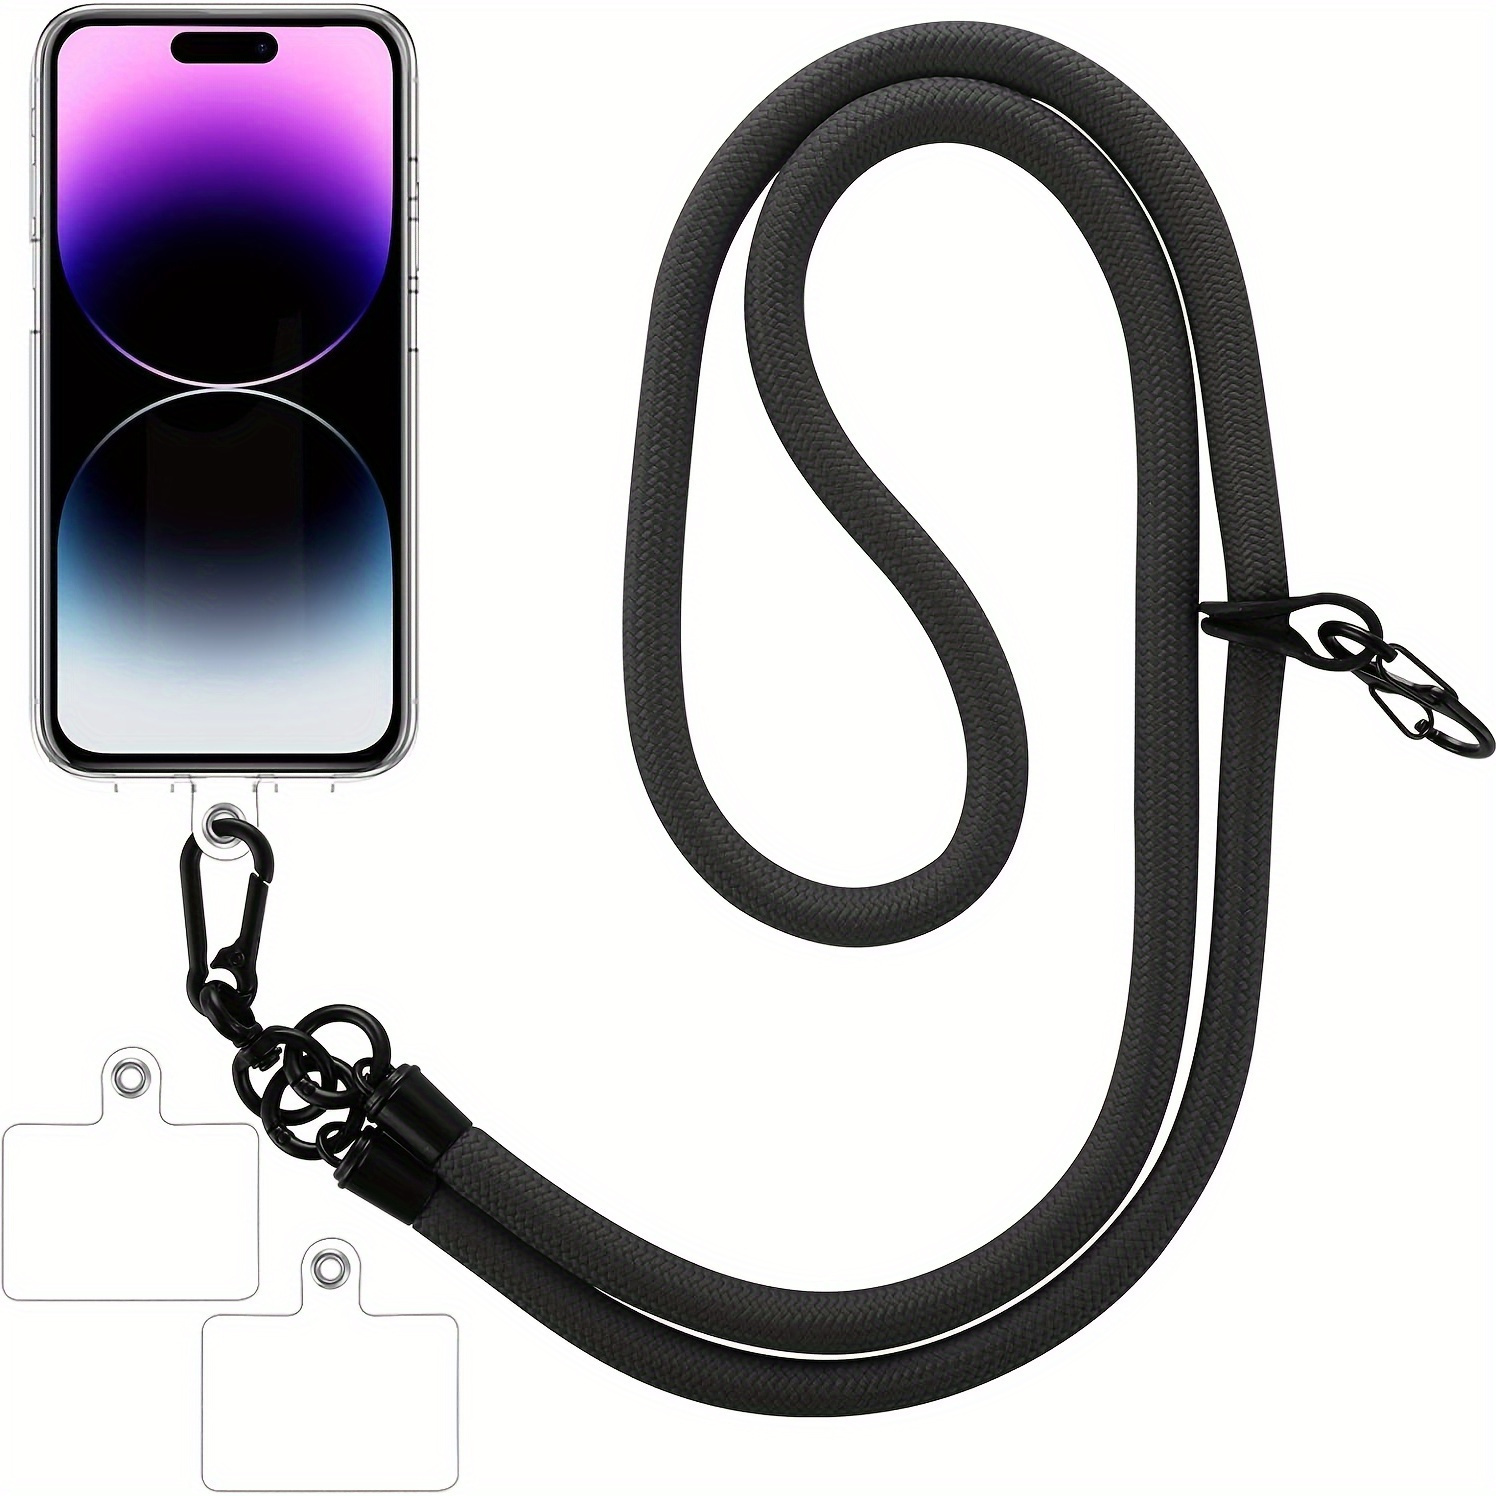  Cruise Phone Lanyard for Men,CellPhone Crossbody Straps Leash  Smartphone Adjustable Wrist Strap Necklace,Cell Phone Tether Phone  Accessories for Teens Teacher Multifuctional Nylon Shoulder Tether Blue :  Cell Phones & Accessories